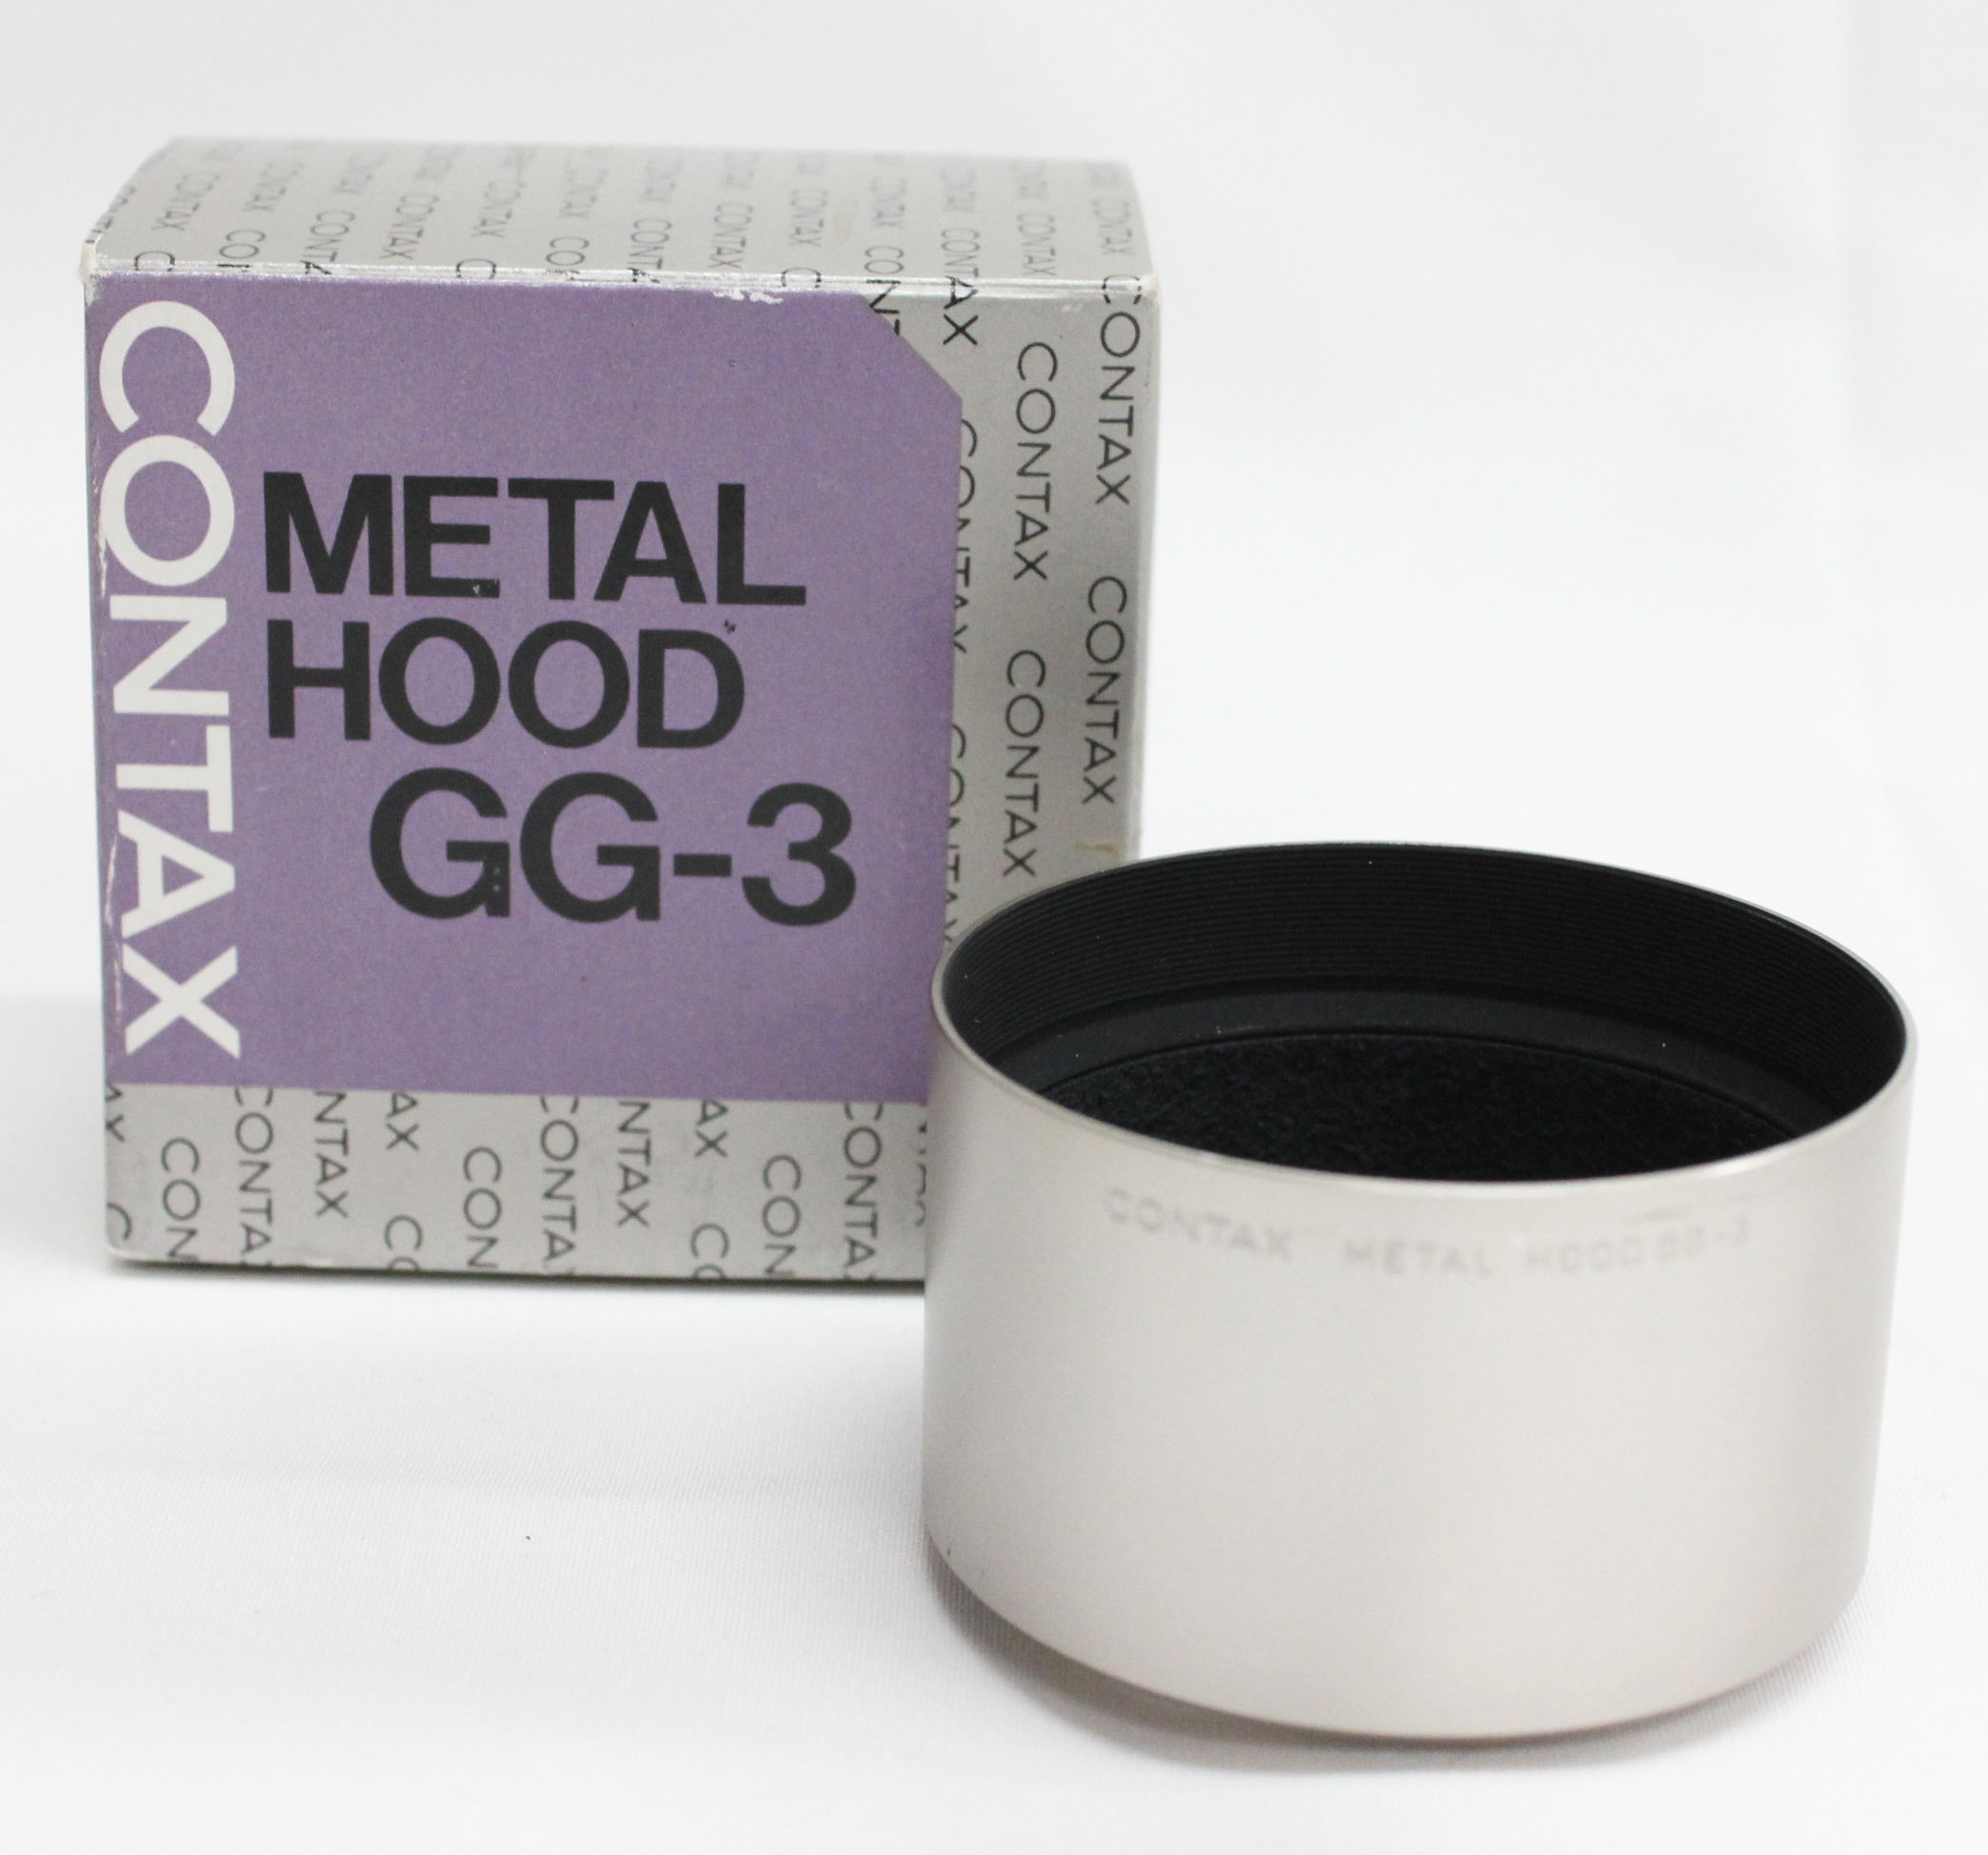 [Mint] Contax Metal Hood GG-3 for G1, G2 Sonnar 90mm F2.8 Lens from Japan